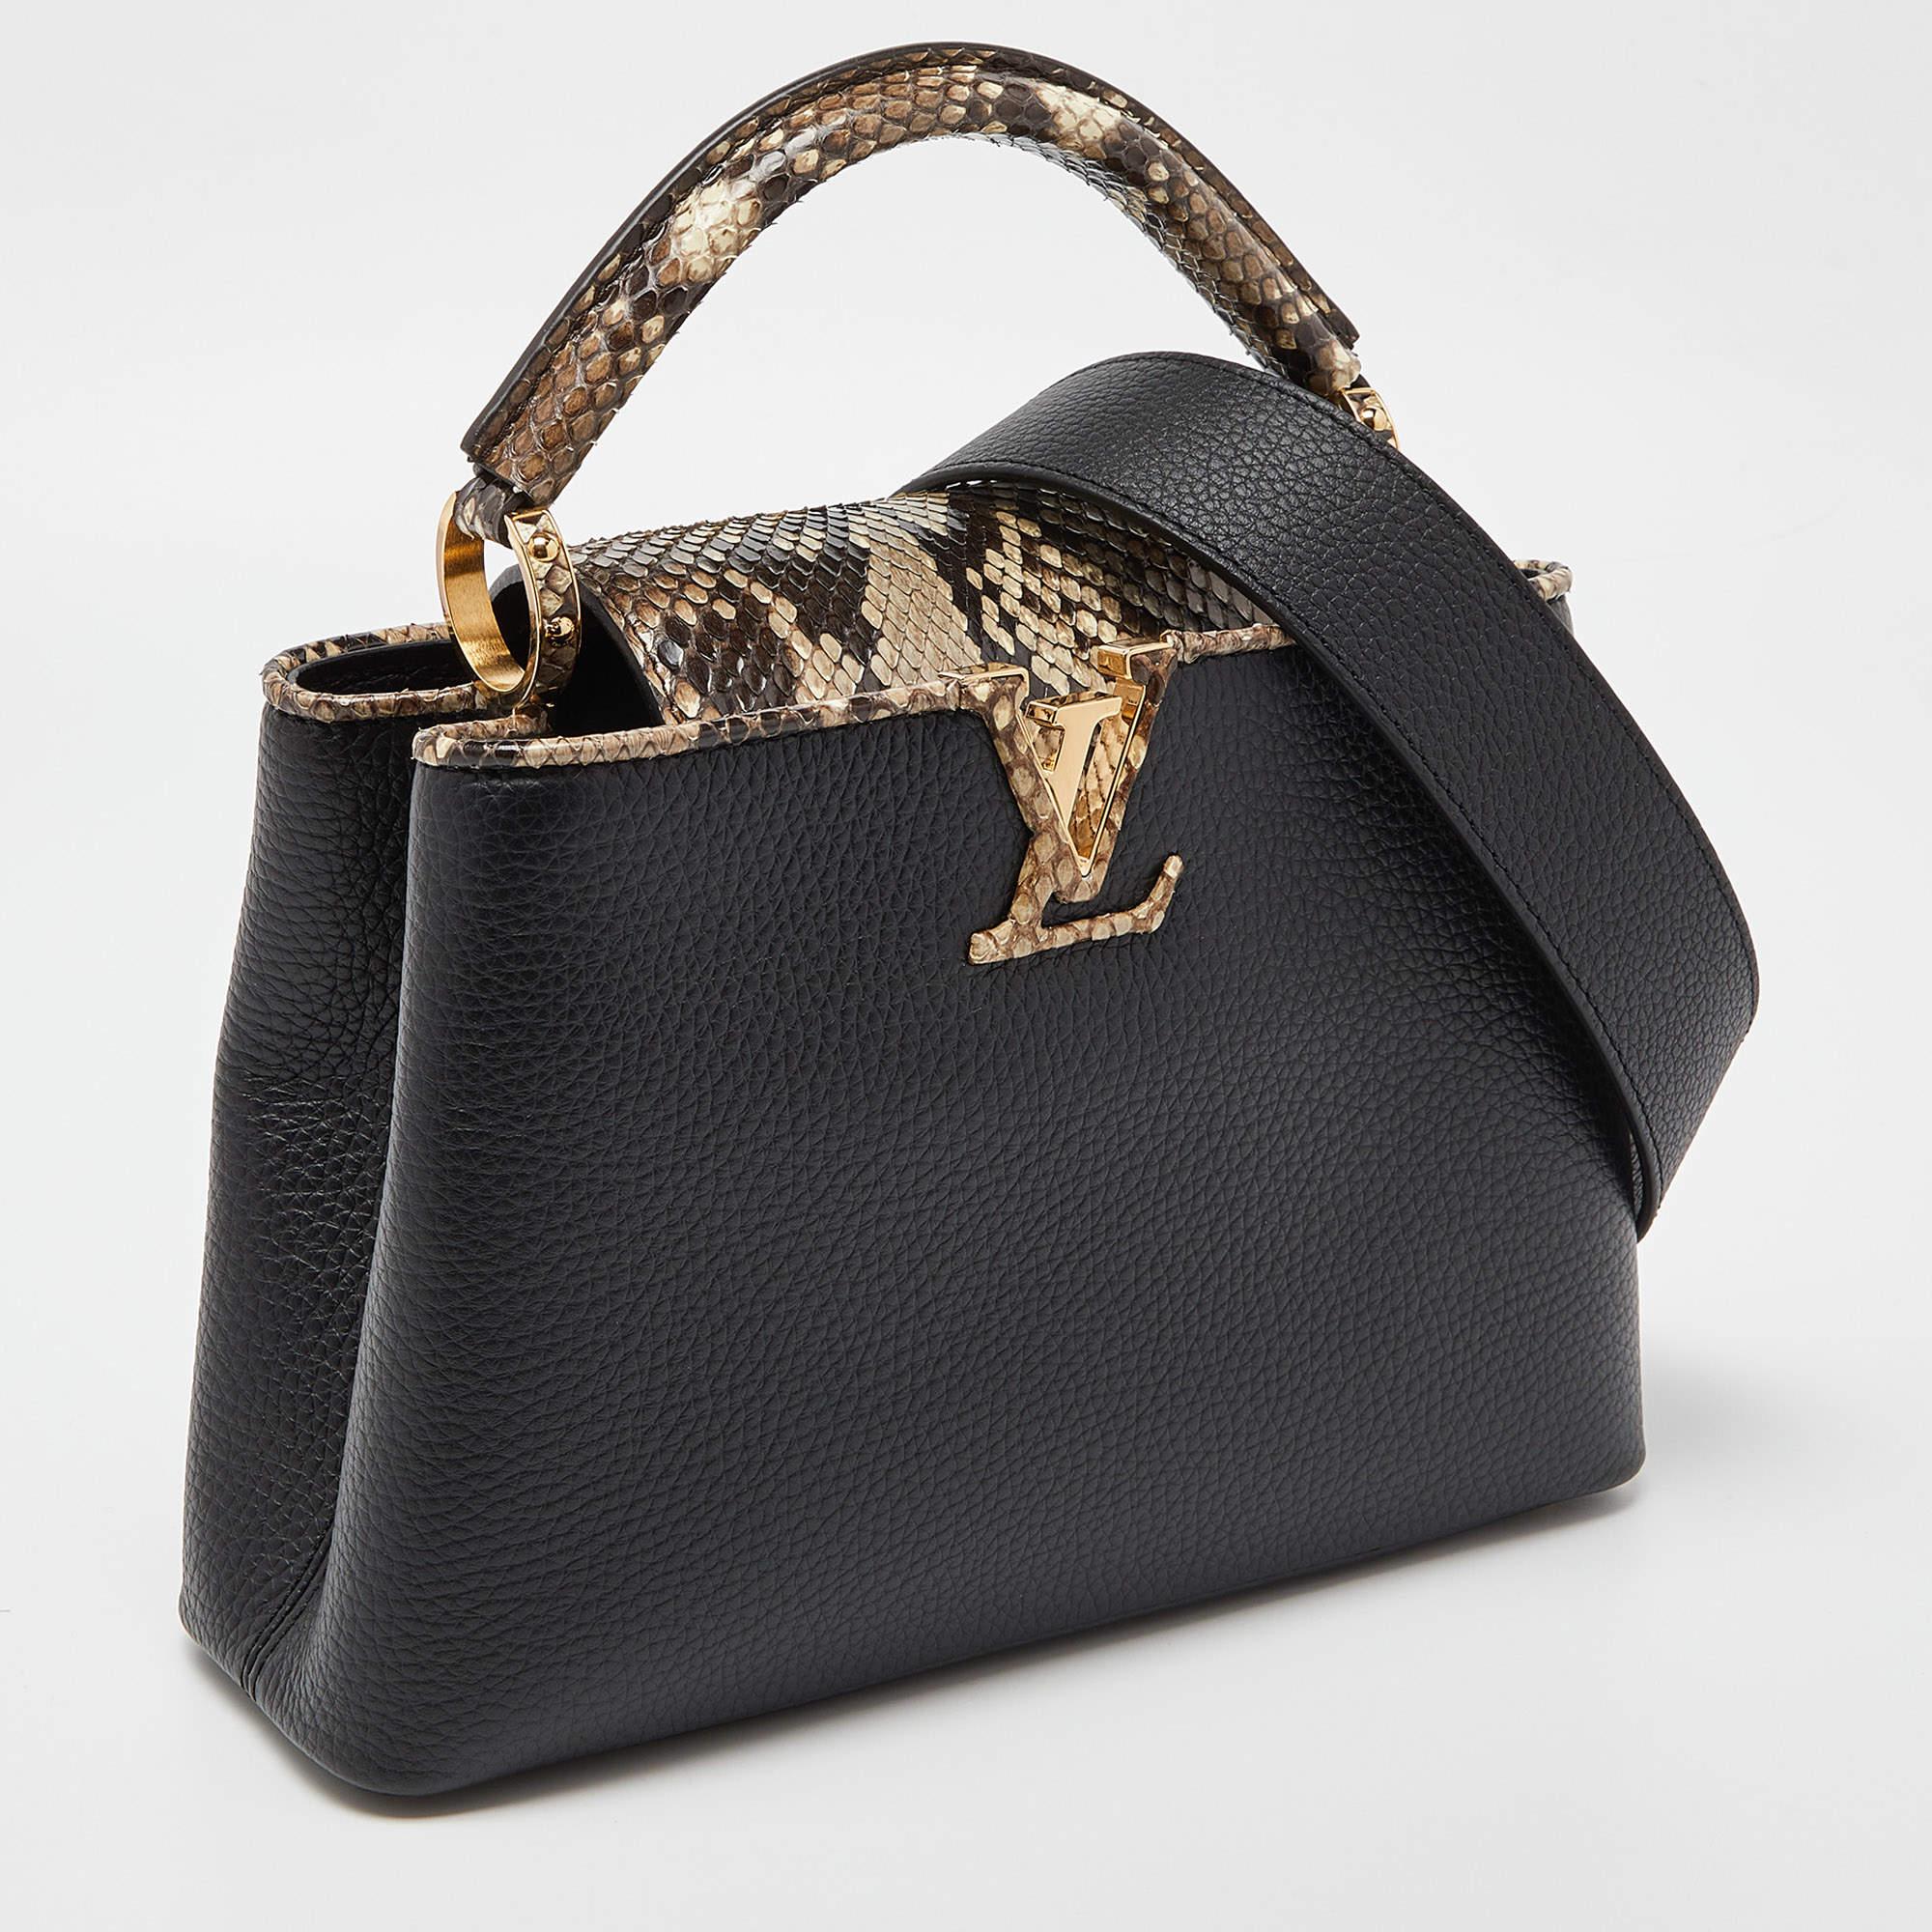 Your closet will always have space for this Louis Vuitton handbag as appealing as this one. Crafted from Taurillon leather, this Capucines BB bag features a structured design with a single python leather handle and protective metal feet. While the